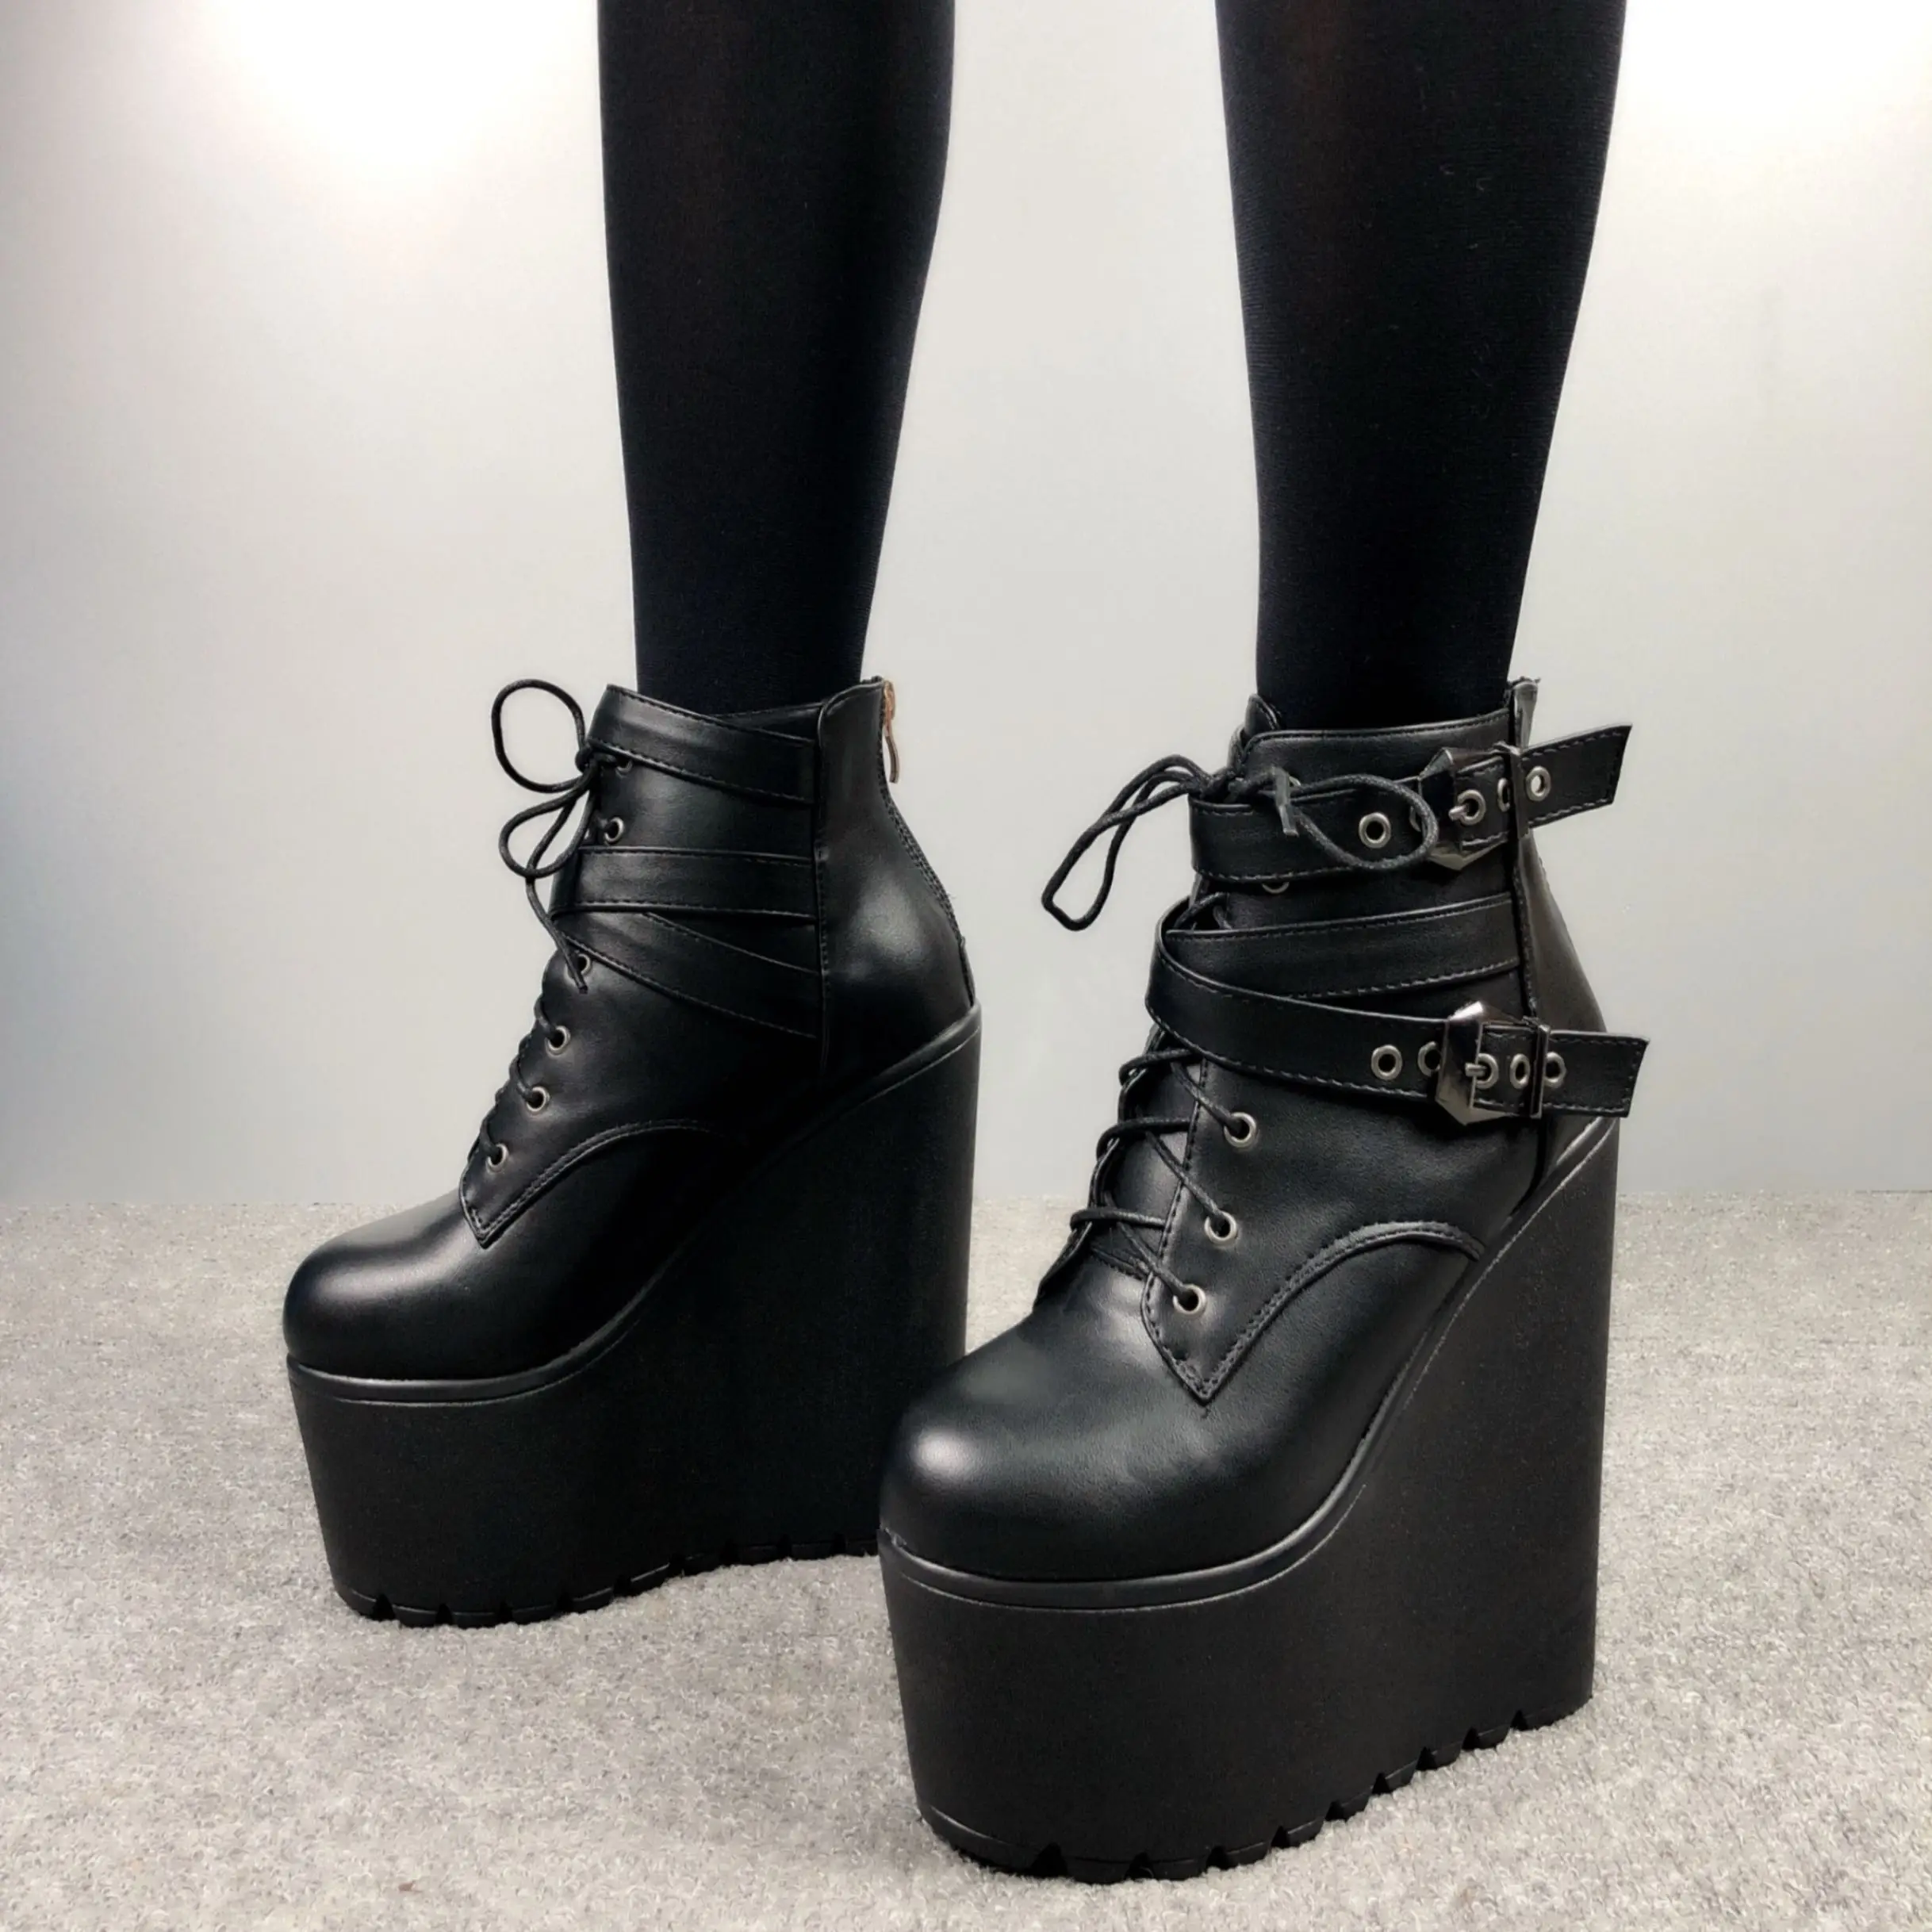 POISON-101  5 " GOTH COMBAT PUNK ROCK CASUAL  WEDGE LACE UP PLATFORM ANKLE BOOT 